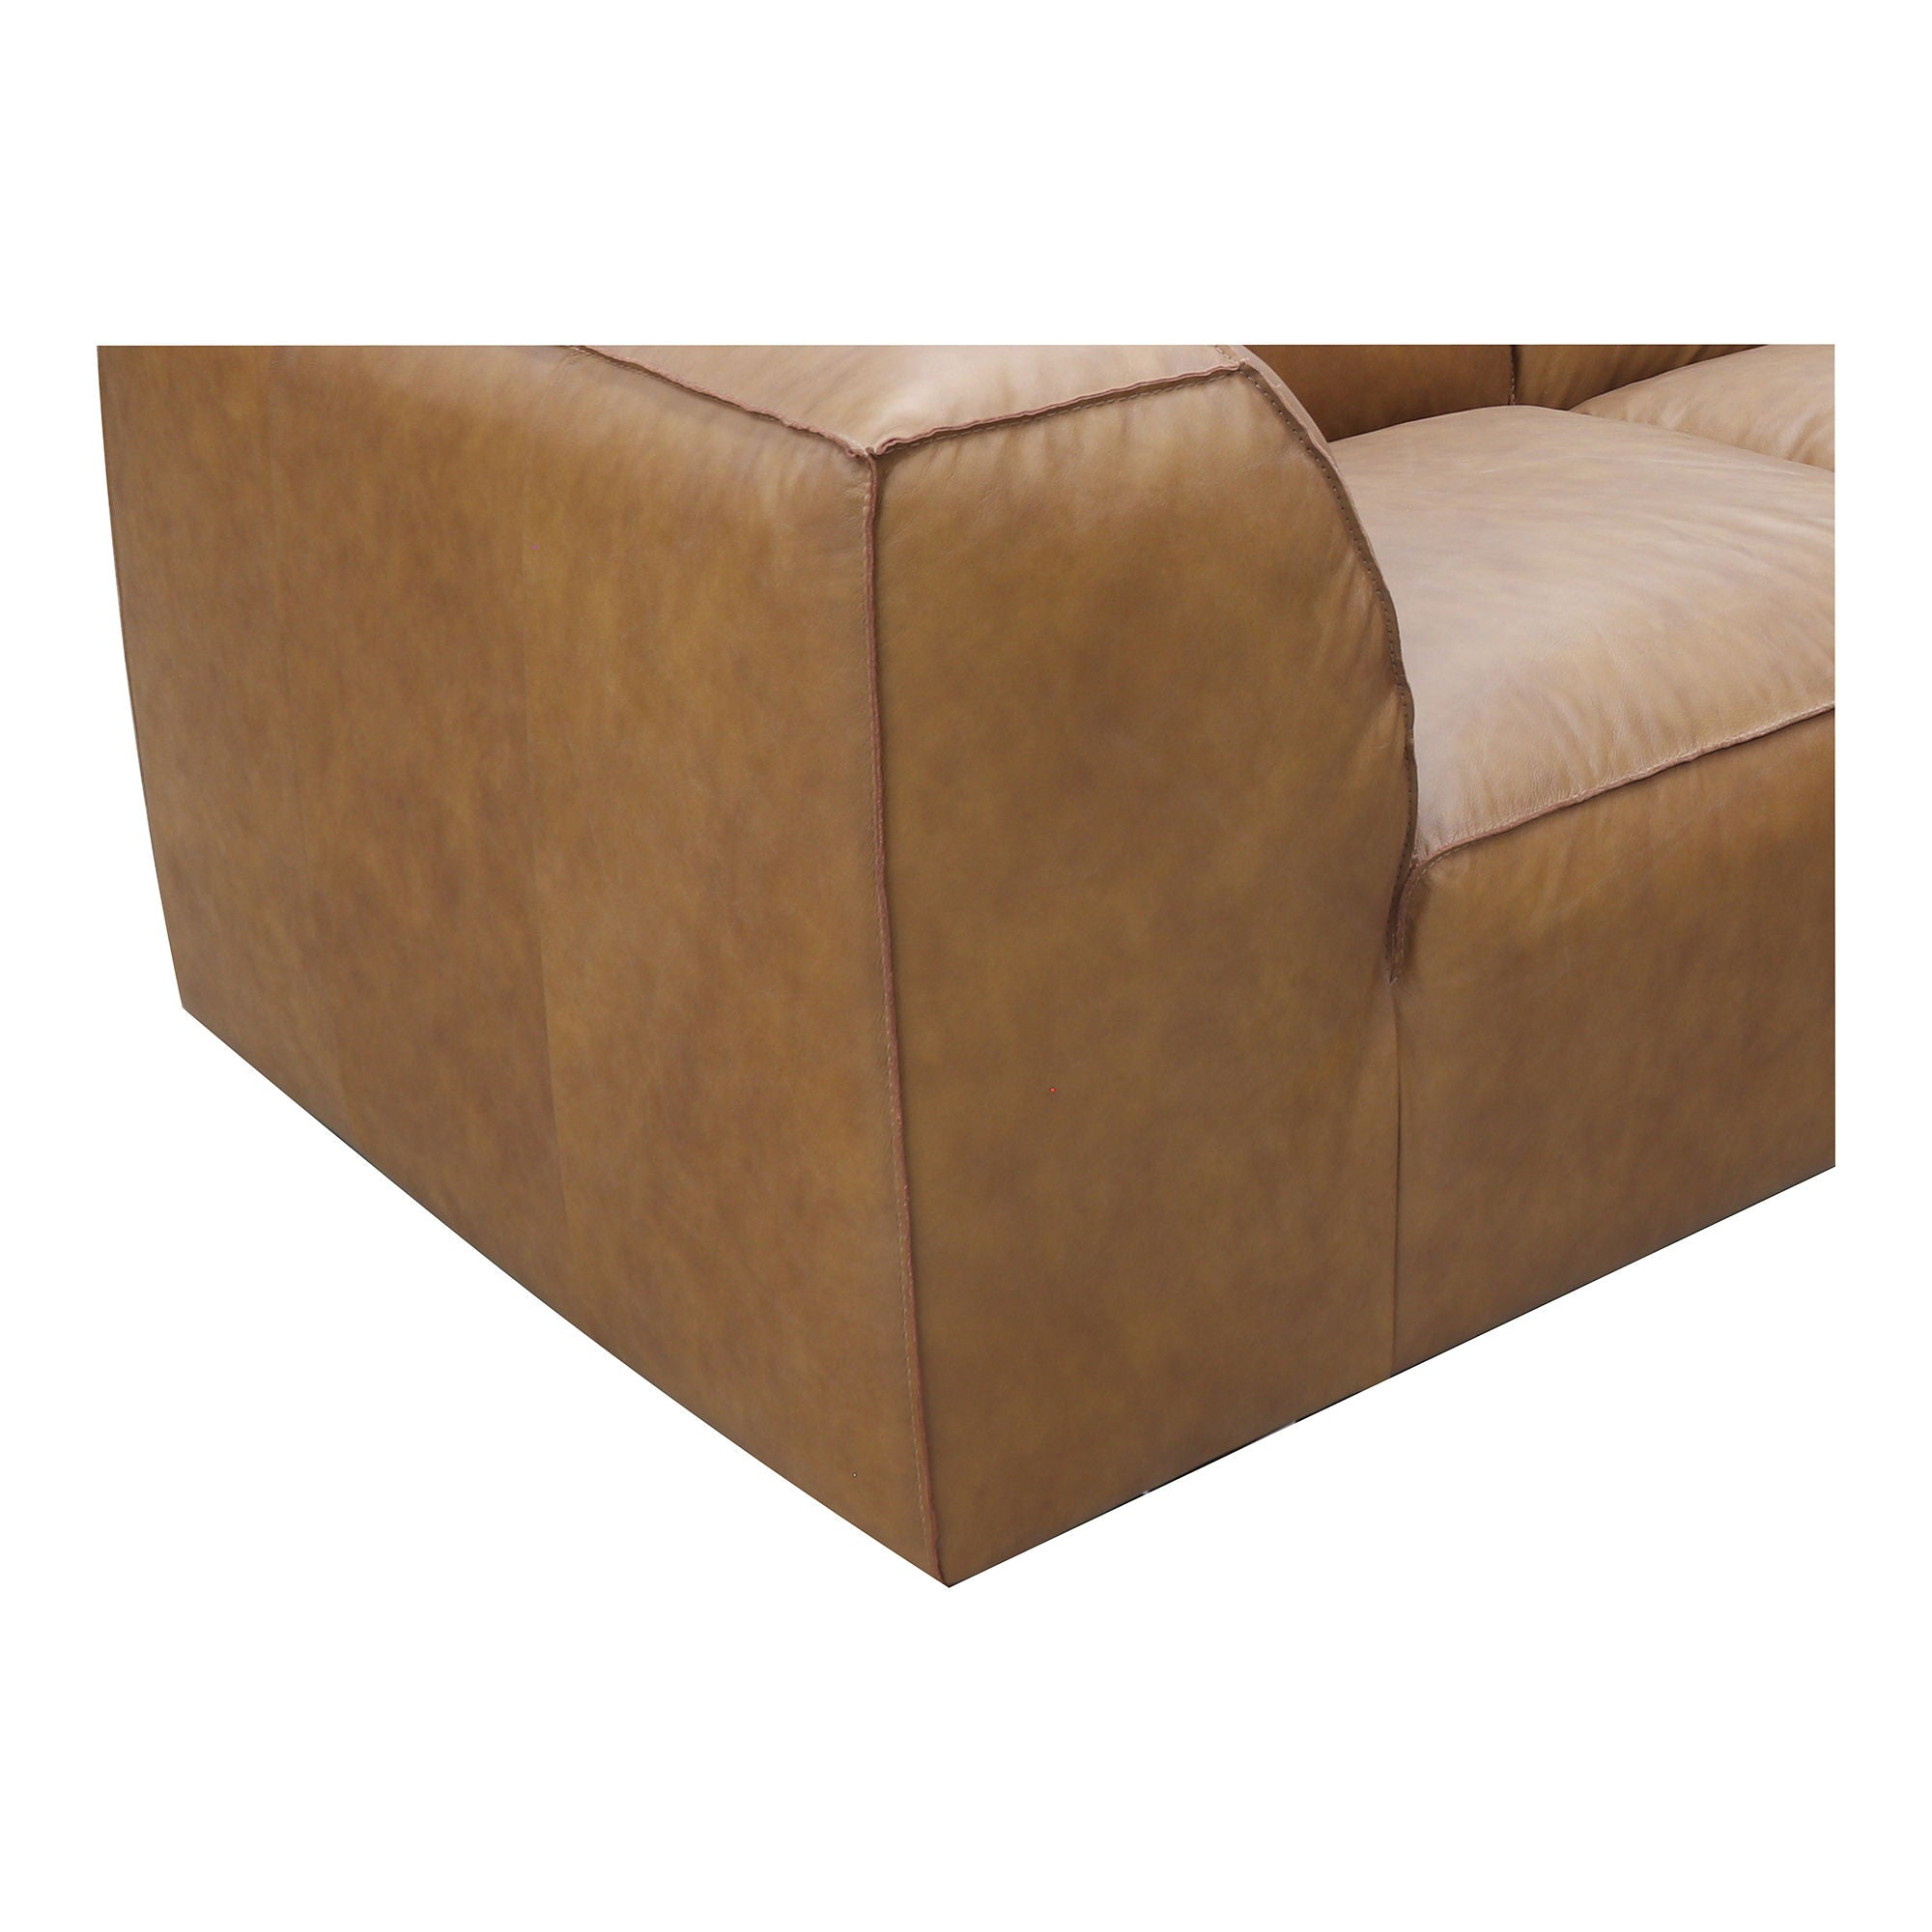 Form Tan Leather Modular Sectional - Lounge in Luxury